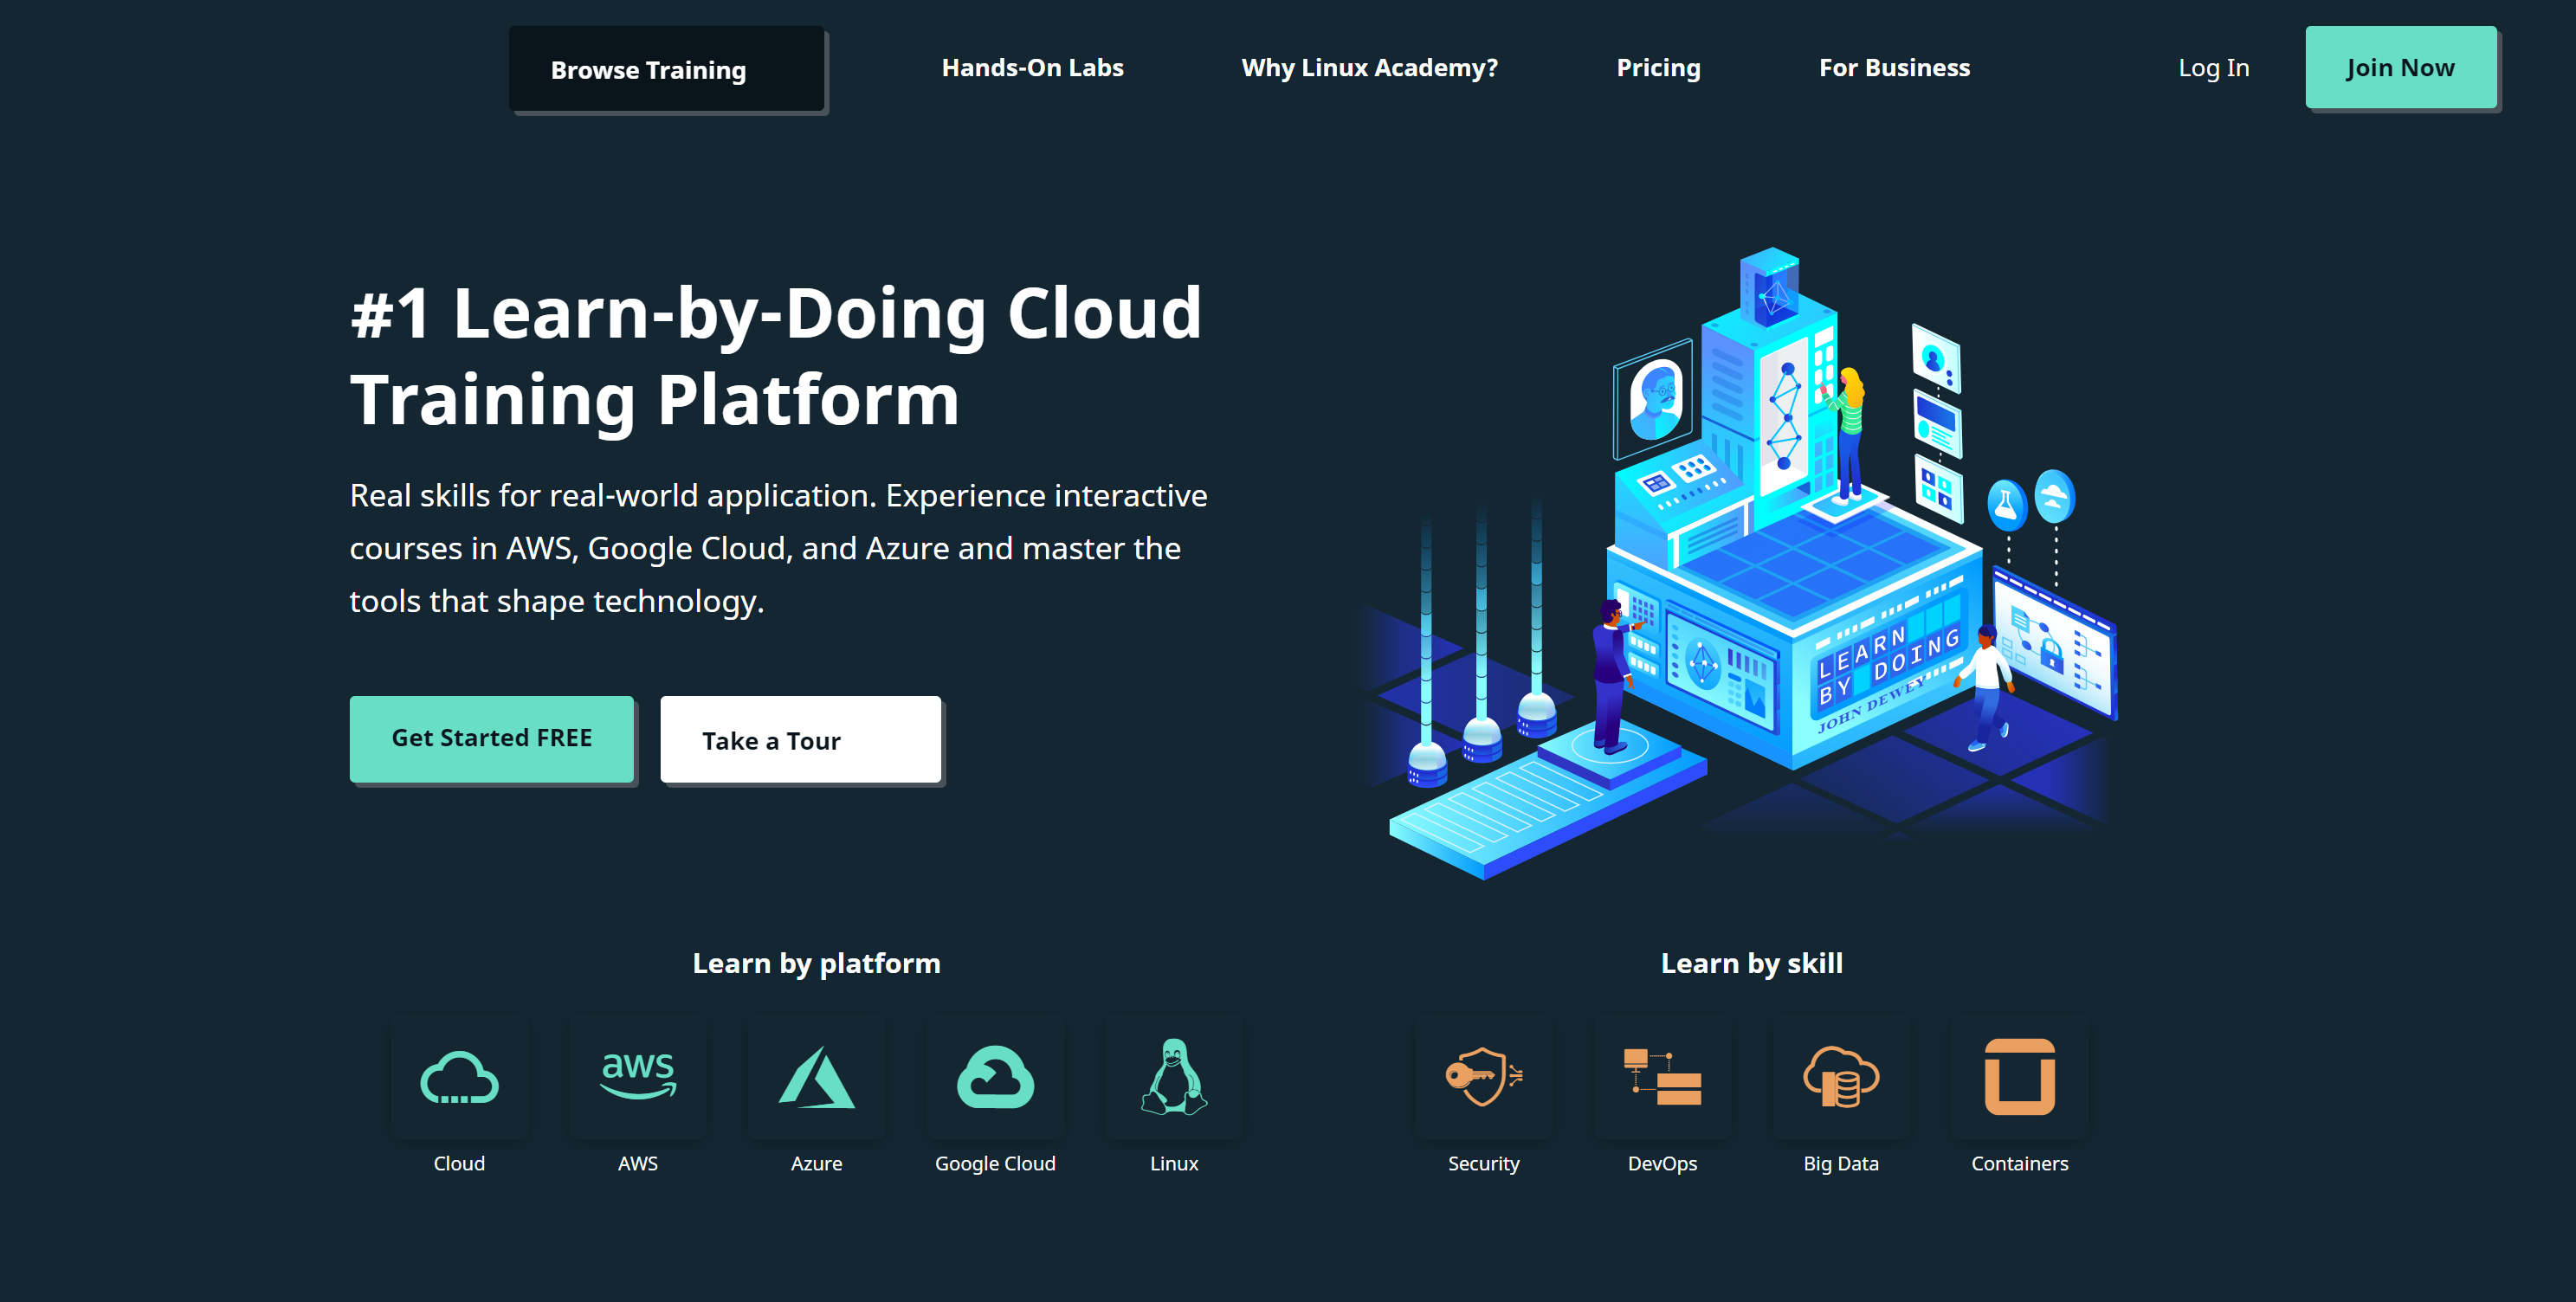 _1 Learn-by-Doing Online Cloud Training Platform – Linux Academy